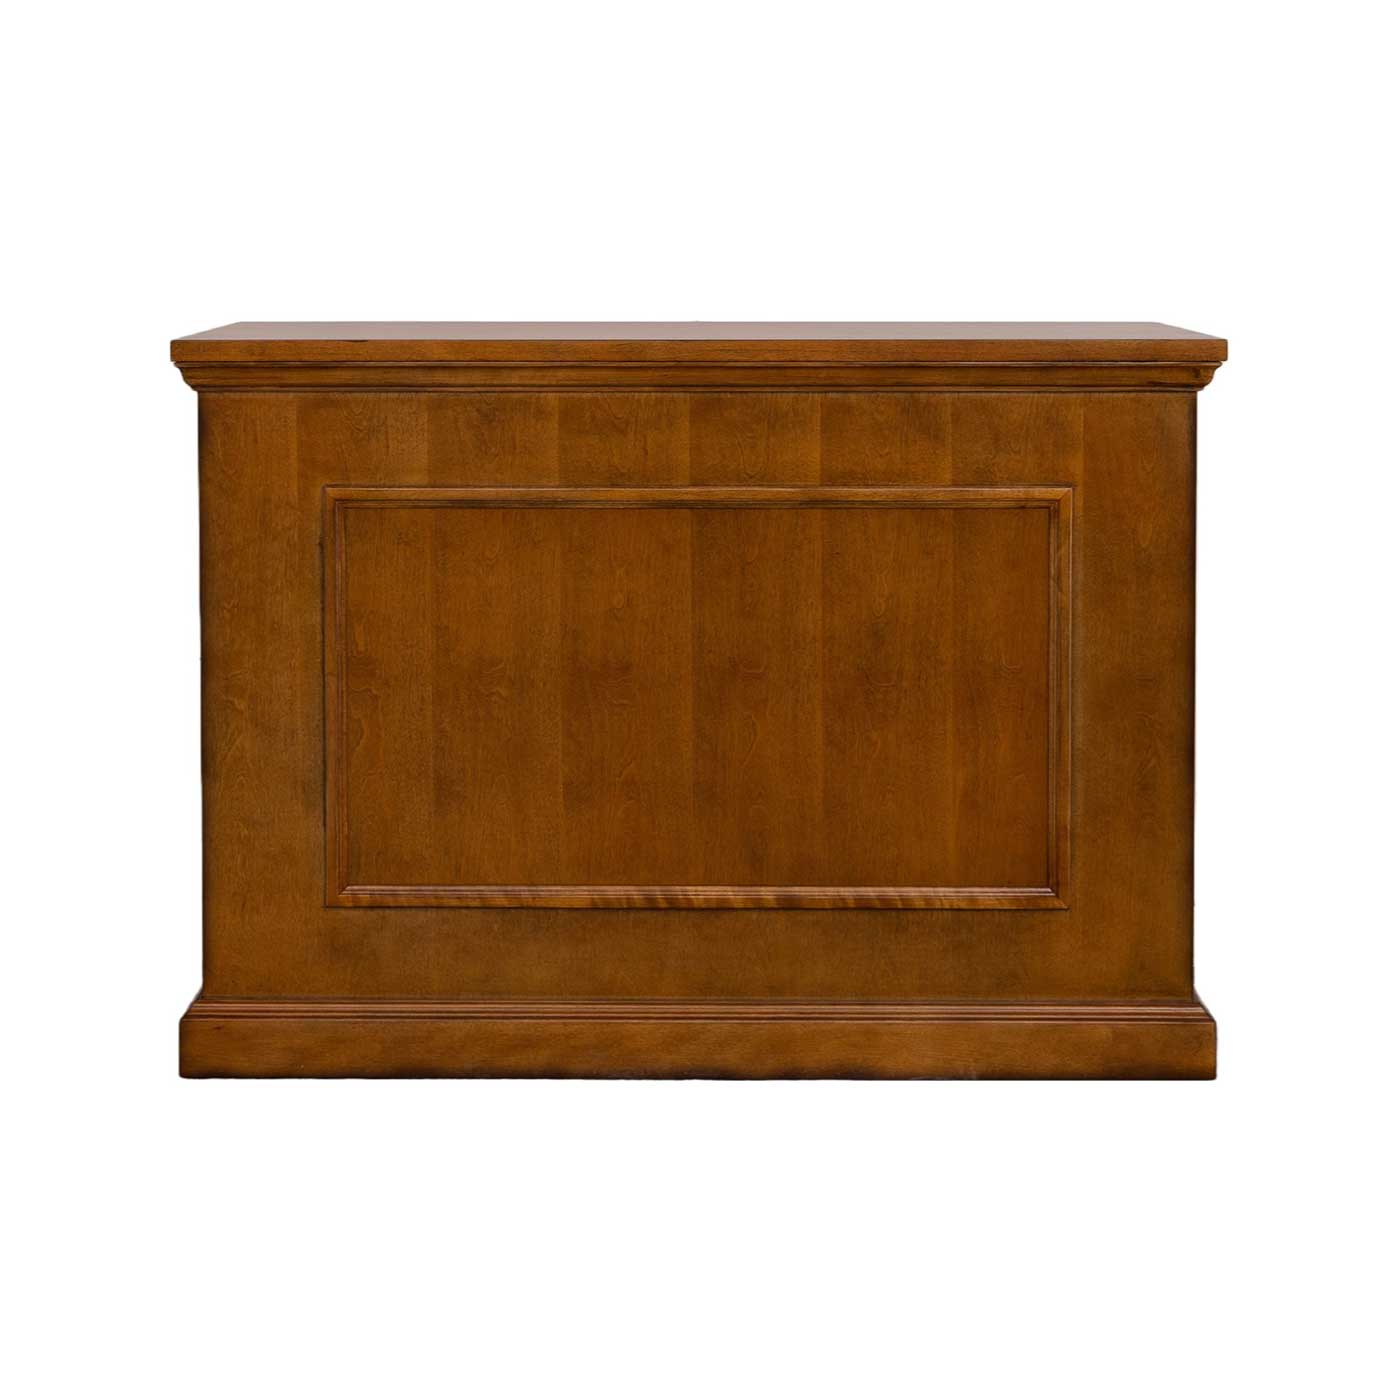 Touchstone Elevate 72009 TV Lift Cabinet in Honey Oak wood finish pictured from the front.